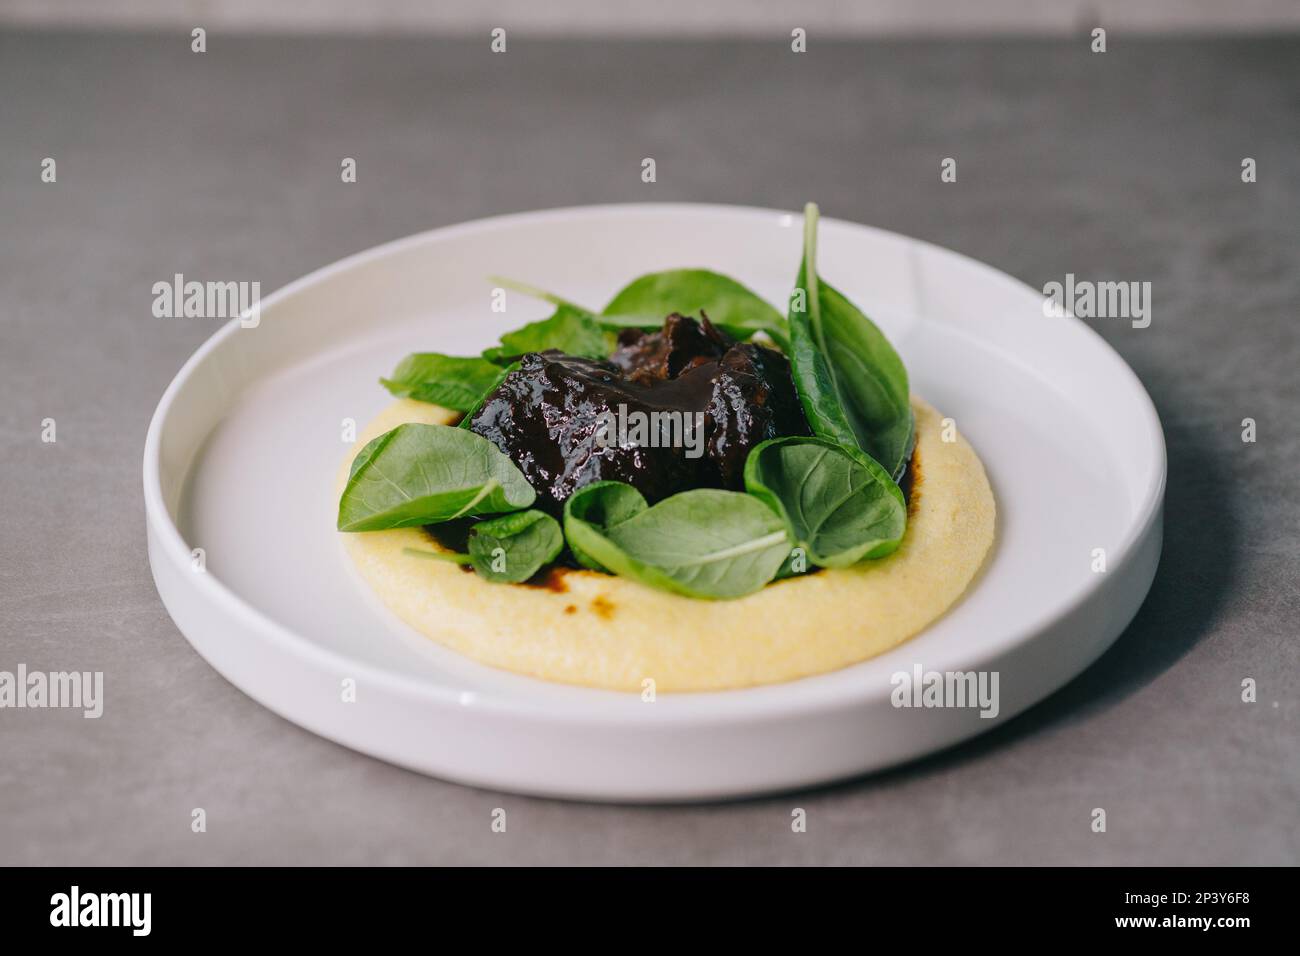 Food on an elegant white plate, lunch or dinner dish. Delicious food in a restaurant close-up. Stock Photo